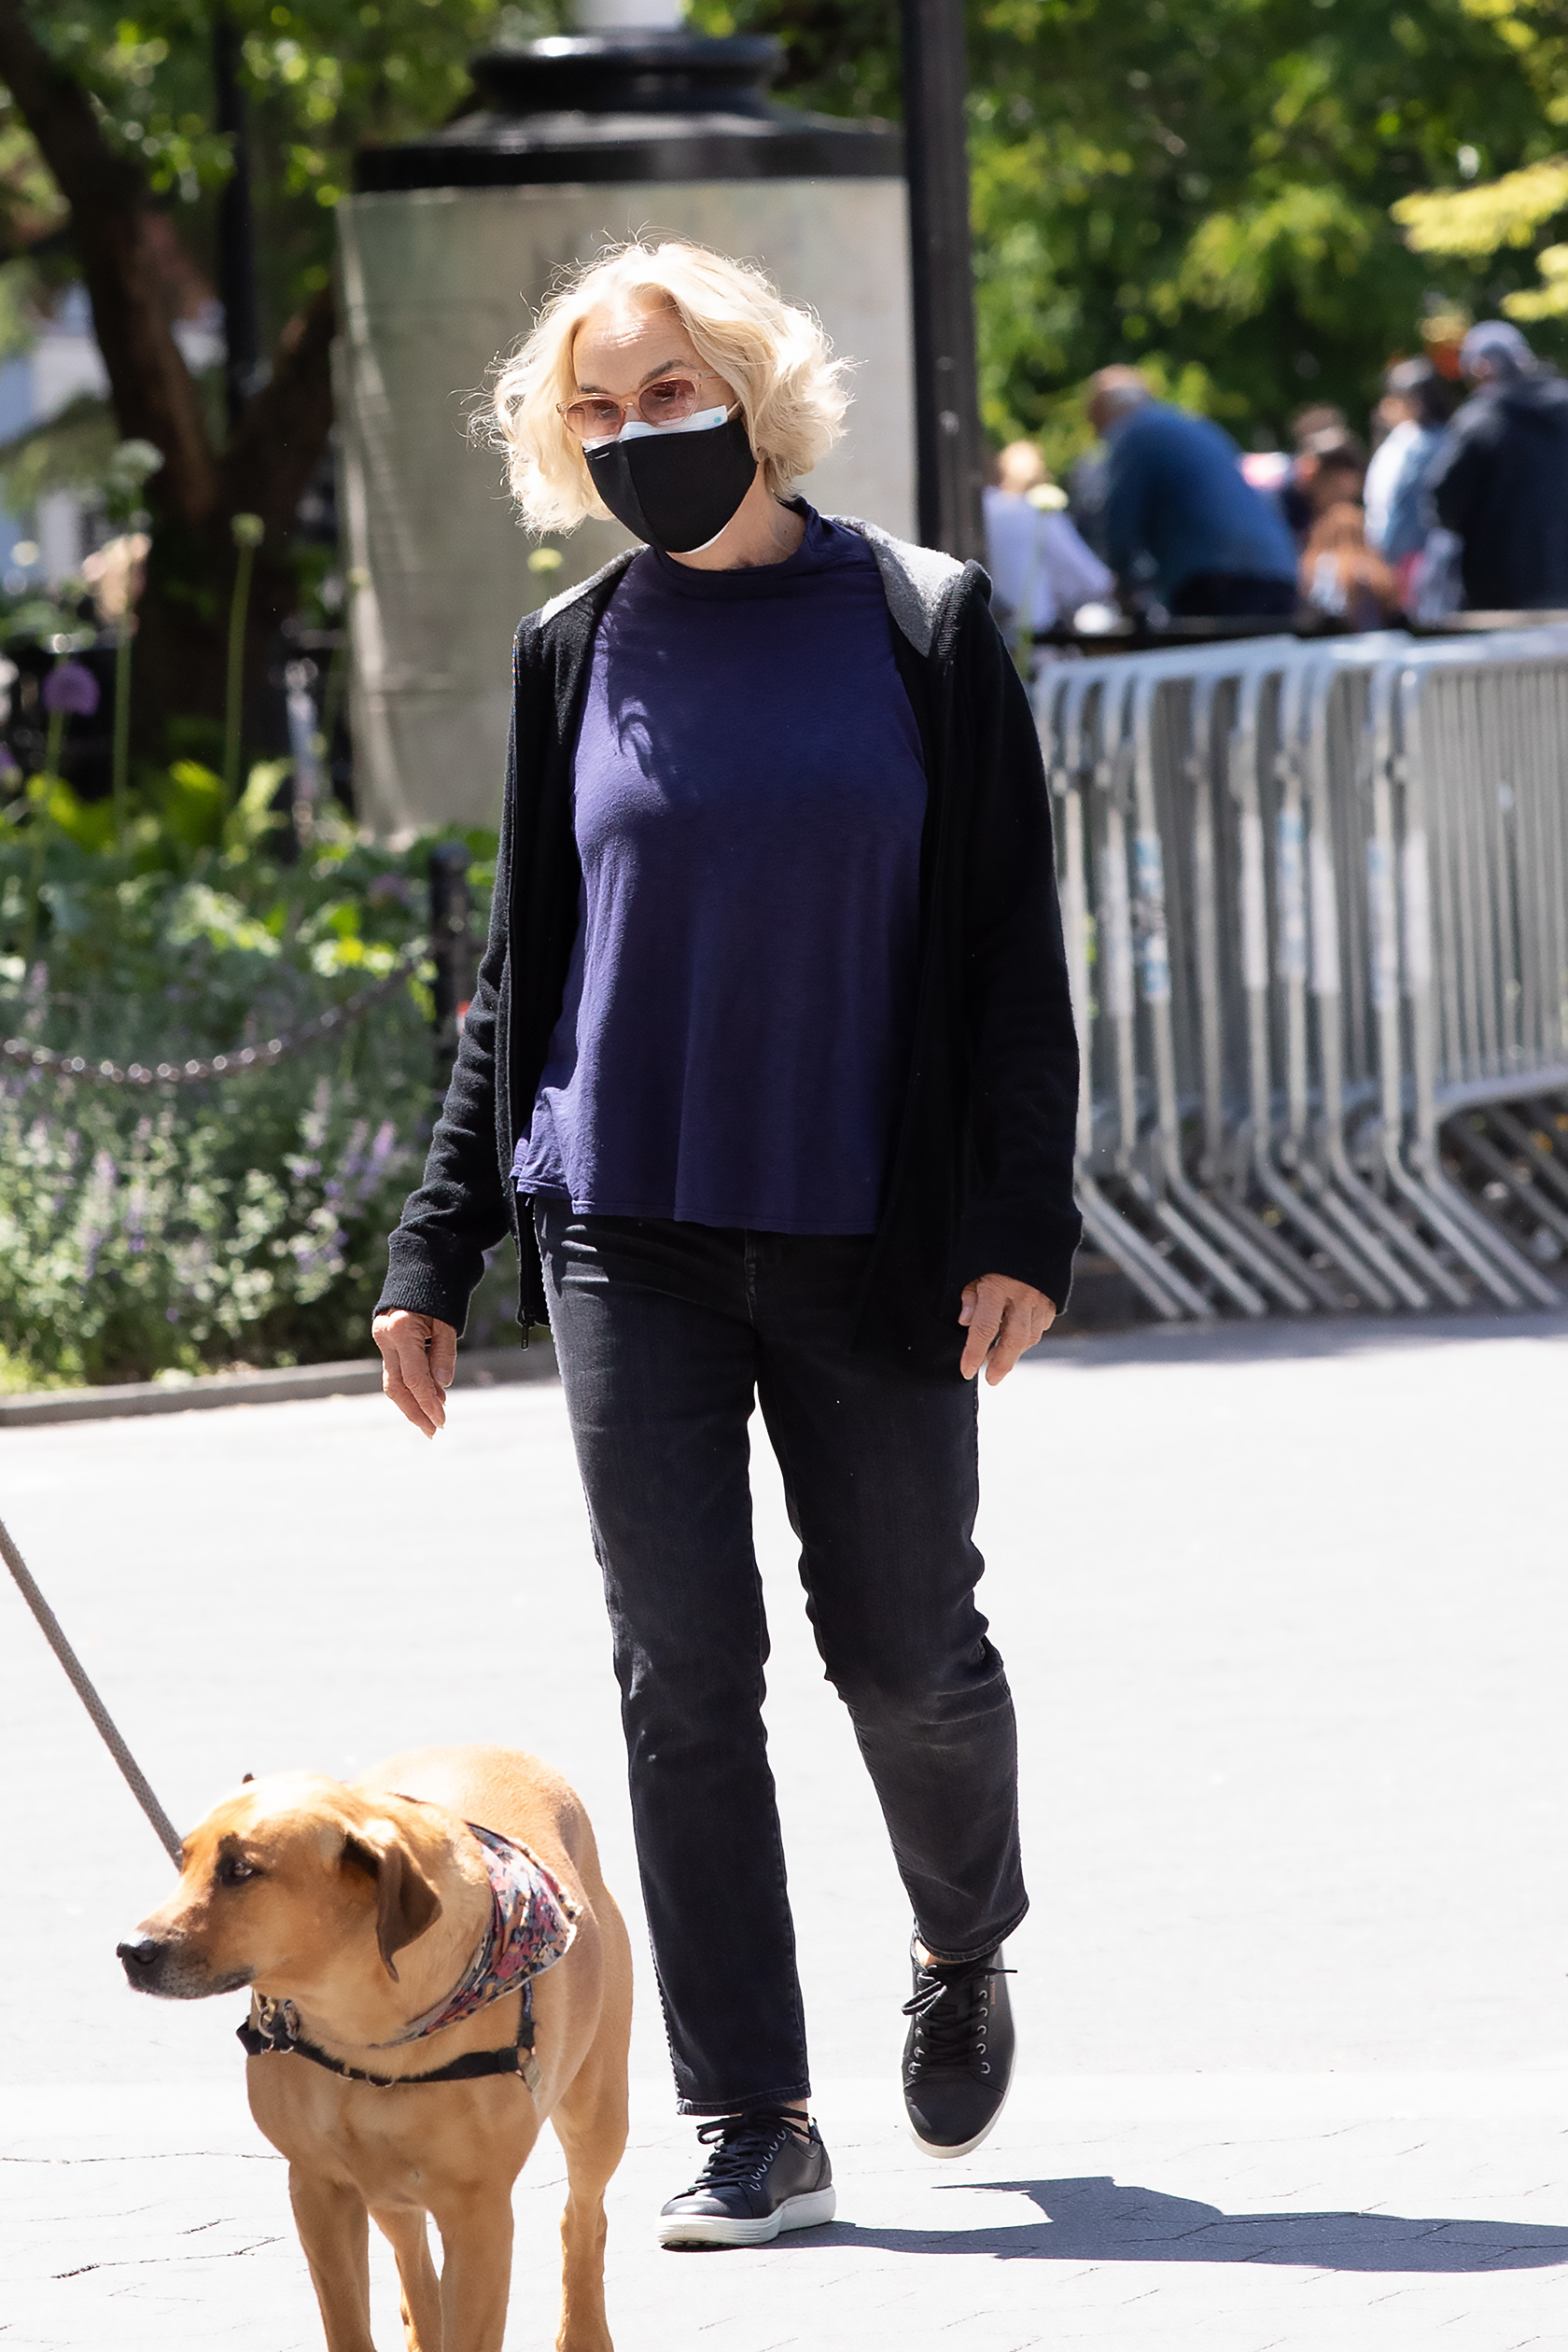 Jessica Lange walks in the city on May 11, 2021 in New York City, New York. | Source: Getty Images